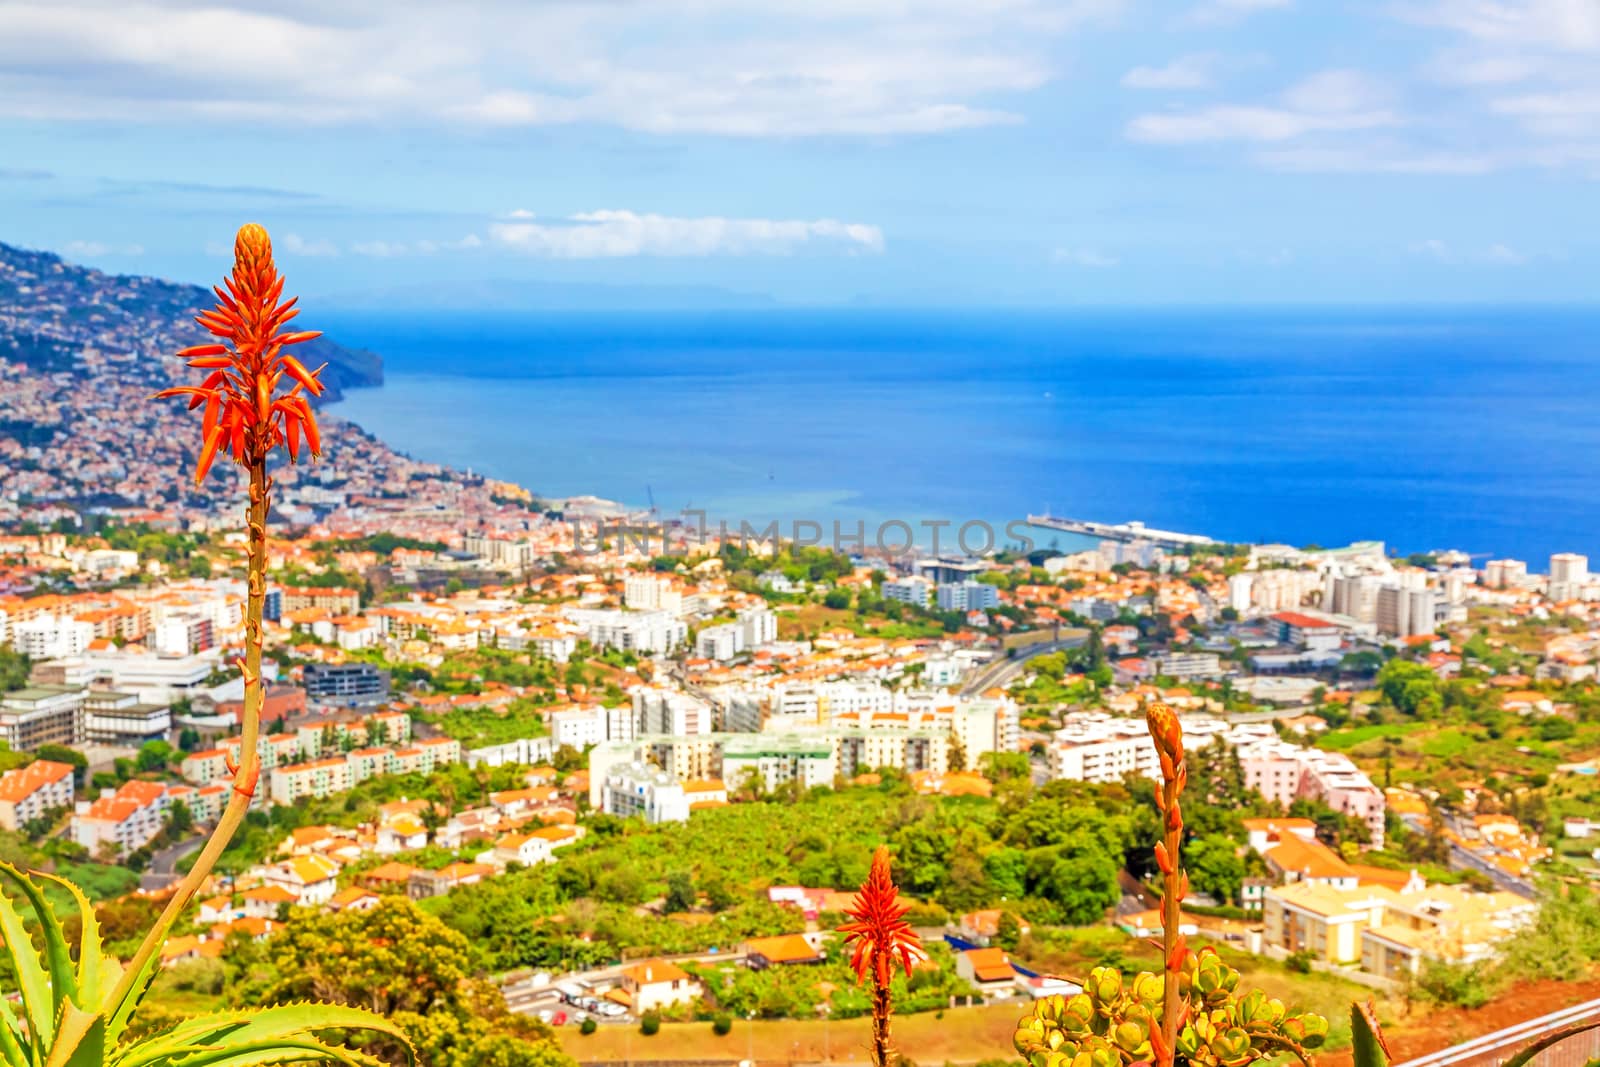 South coast of Funchal - view over the capital city of Madeira towards harbor with typical madeiran flowers in the foreground. View from Pico dos Barcelo.